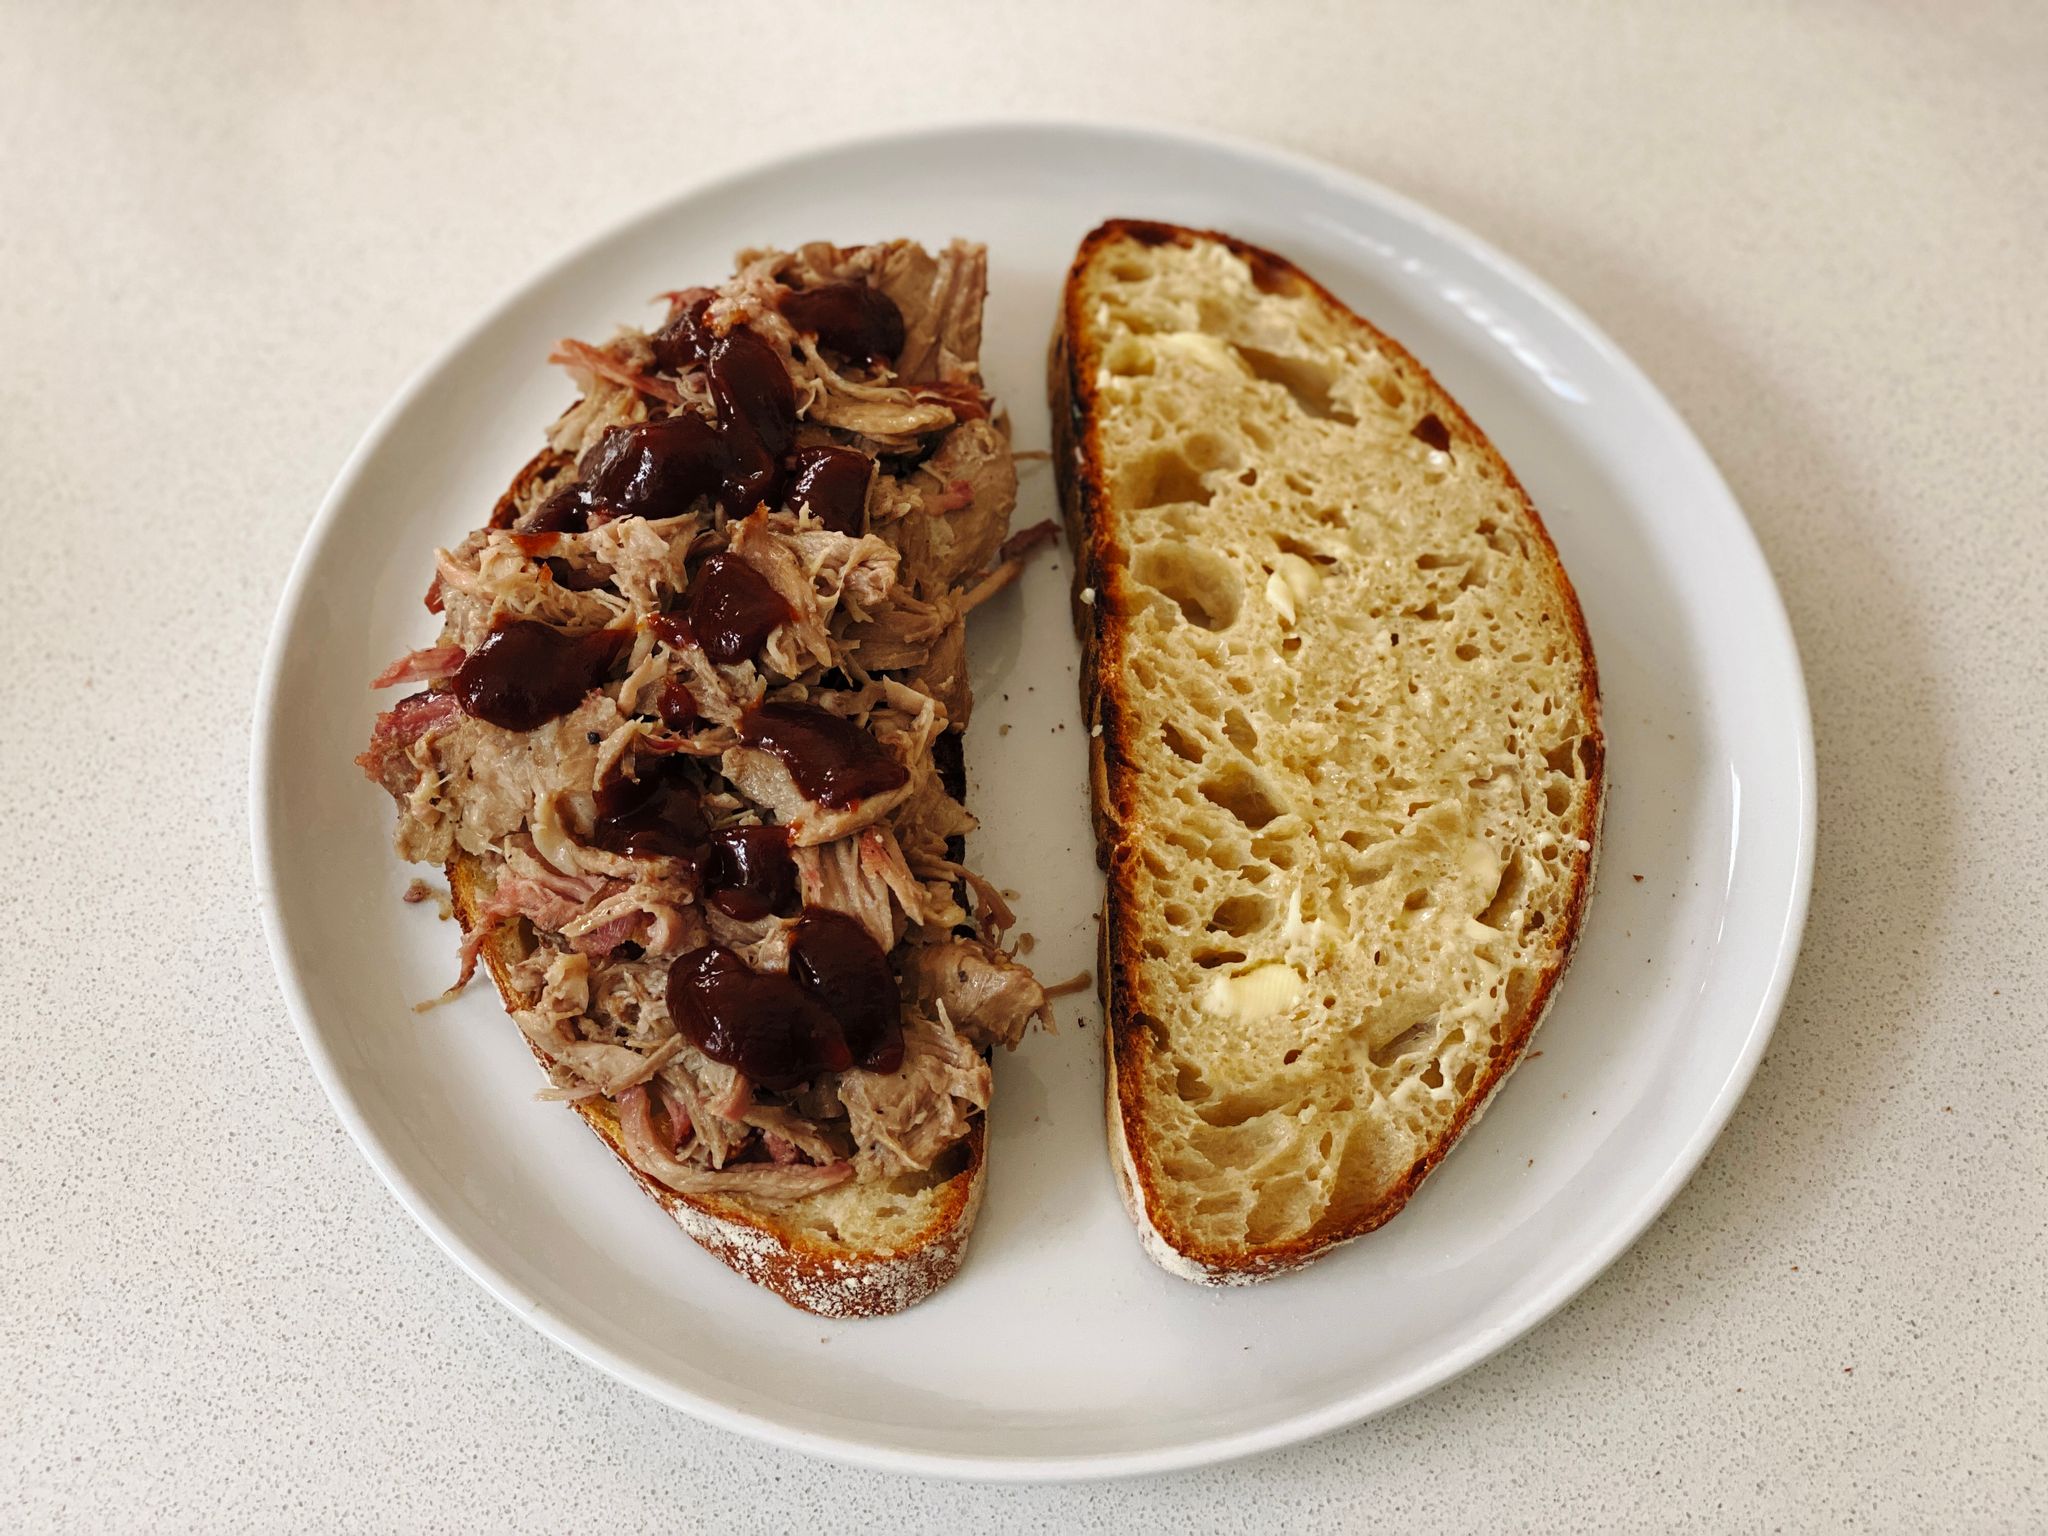 A photo of two slices of the aforementioned bread sitting on a plate, one of the pieces has a ton of pulled pork on it and dollops of barbecue sauce on top.